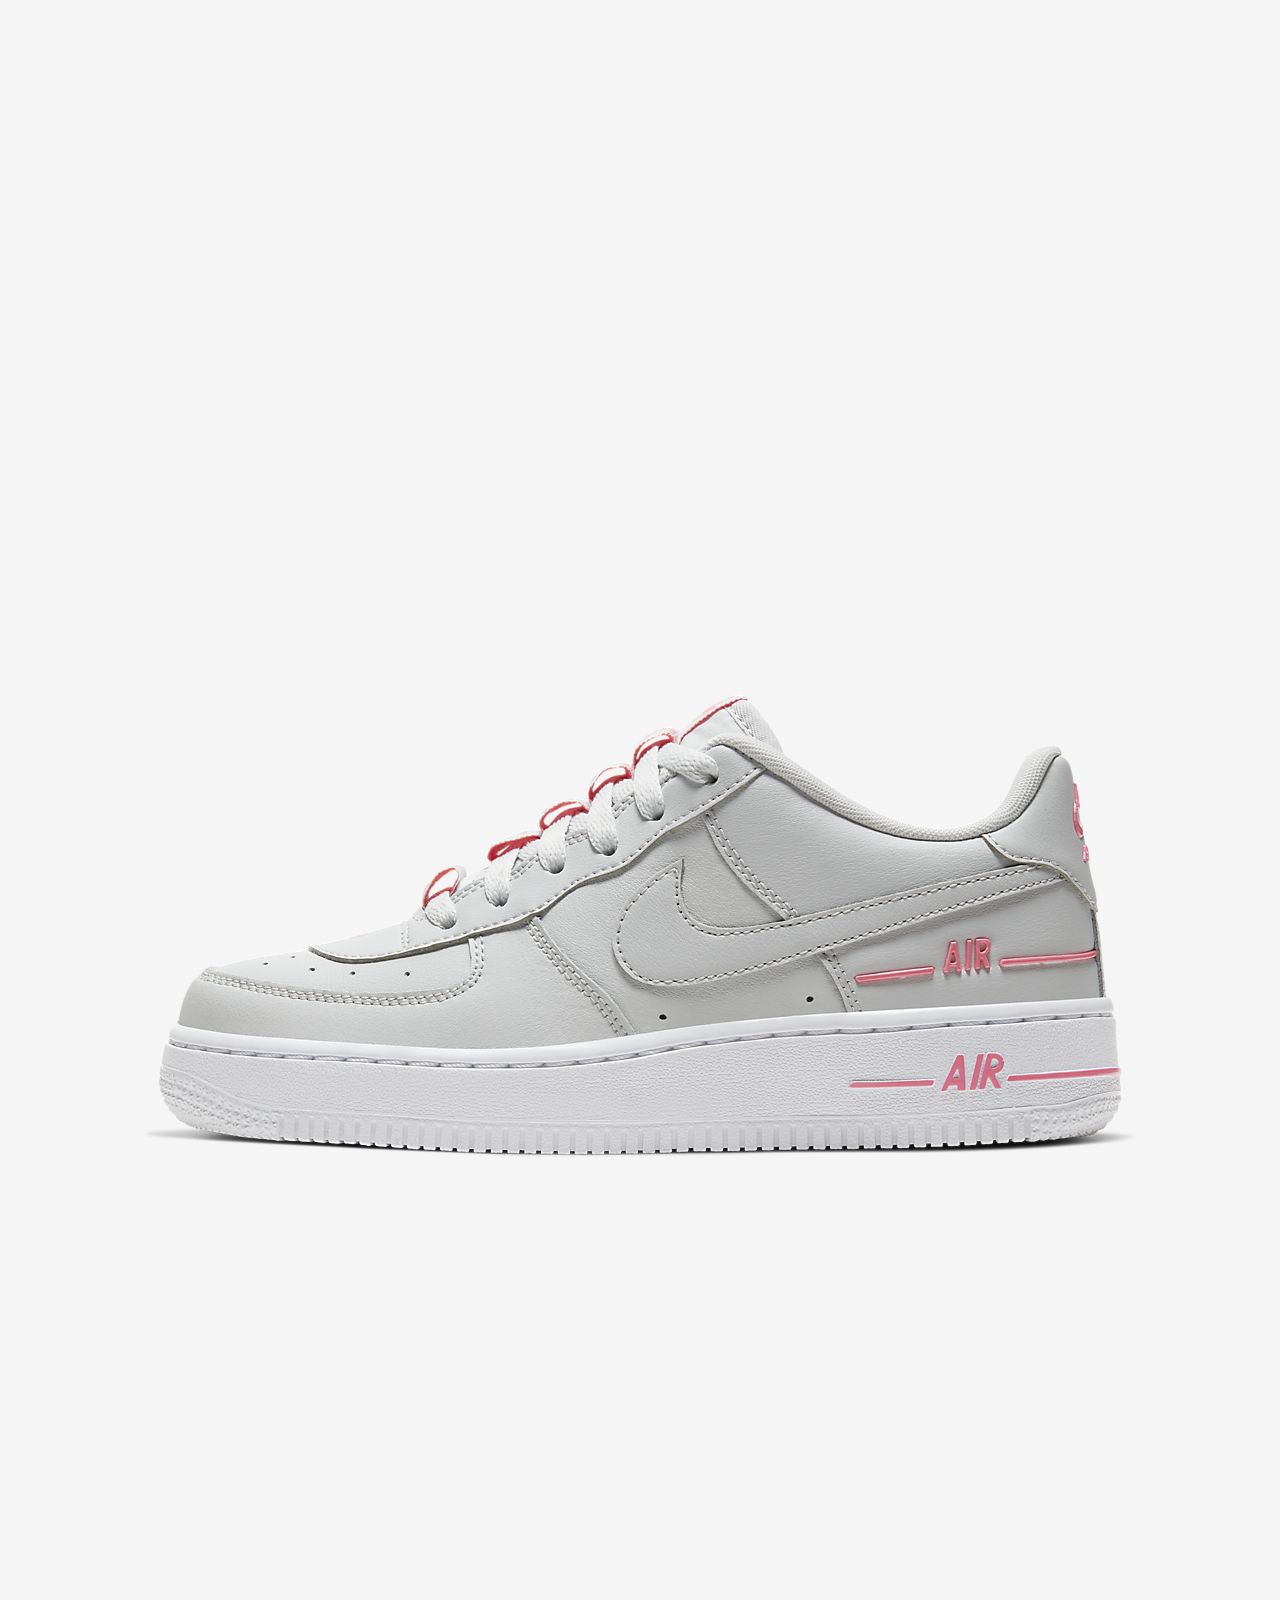 size 3 air force 1 white